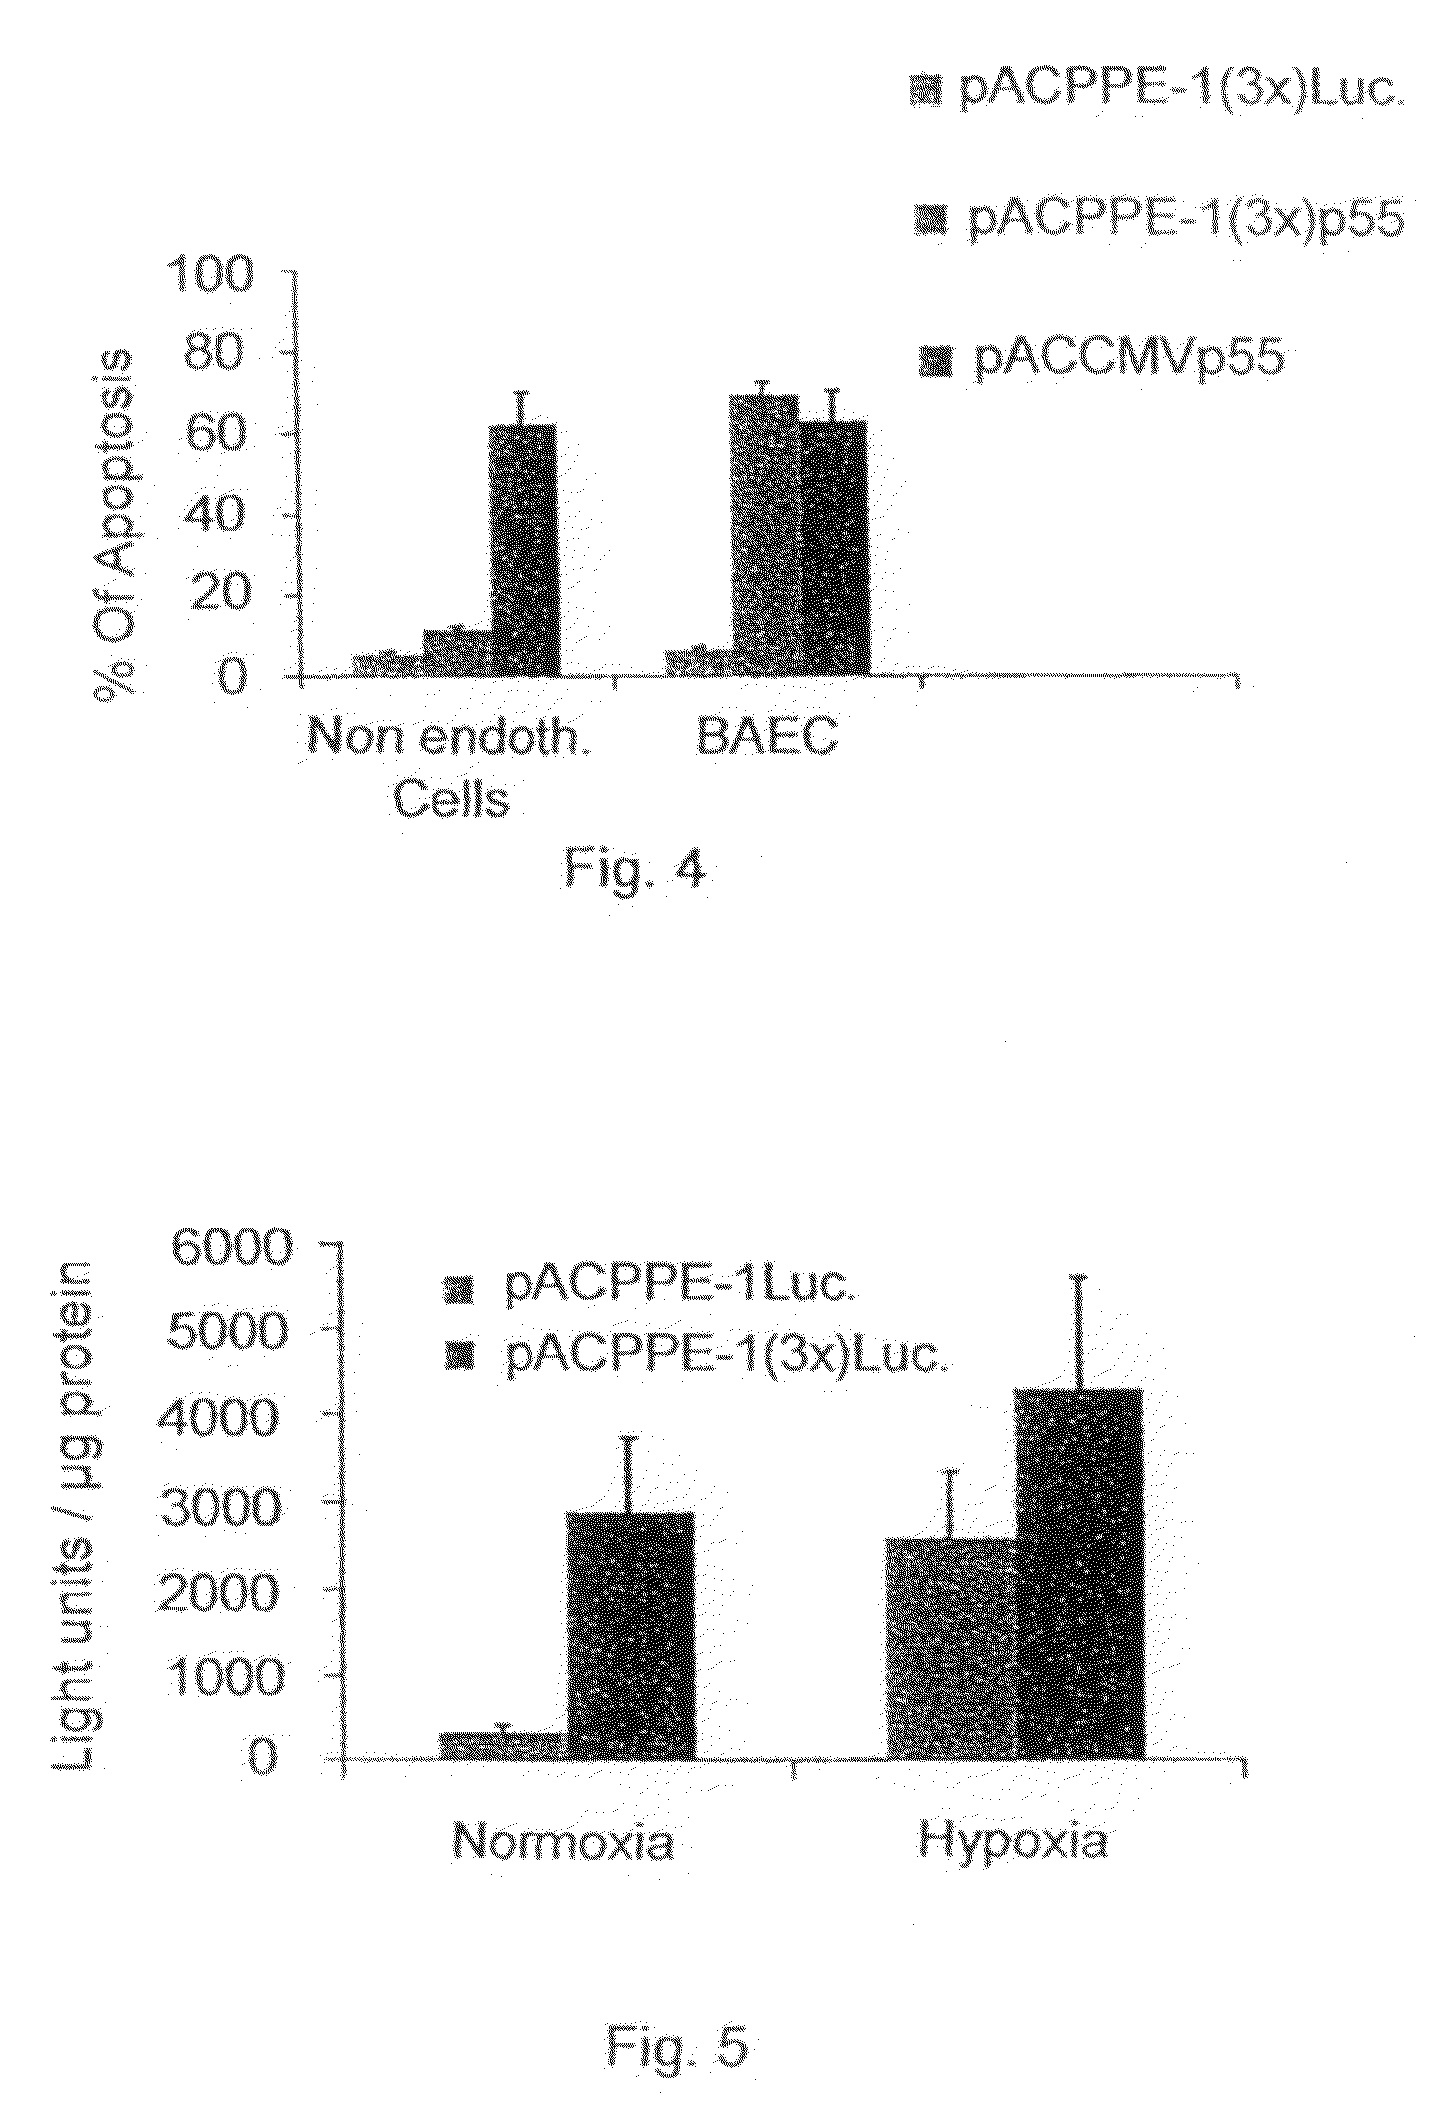 Promoters exhibiting endothelial cell specificity and methods of using same